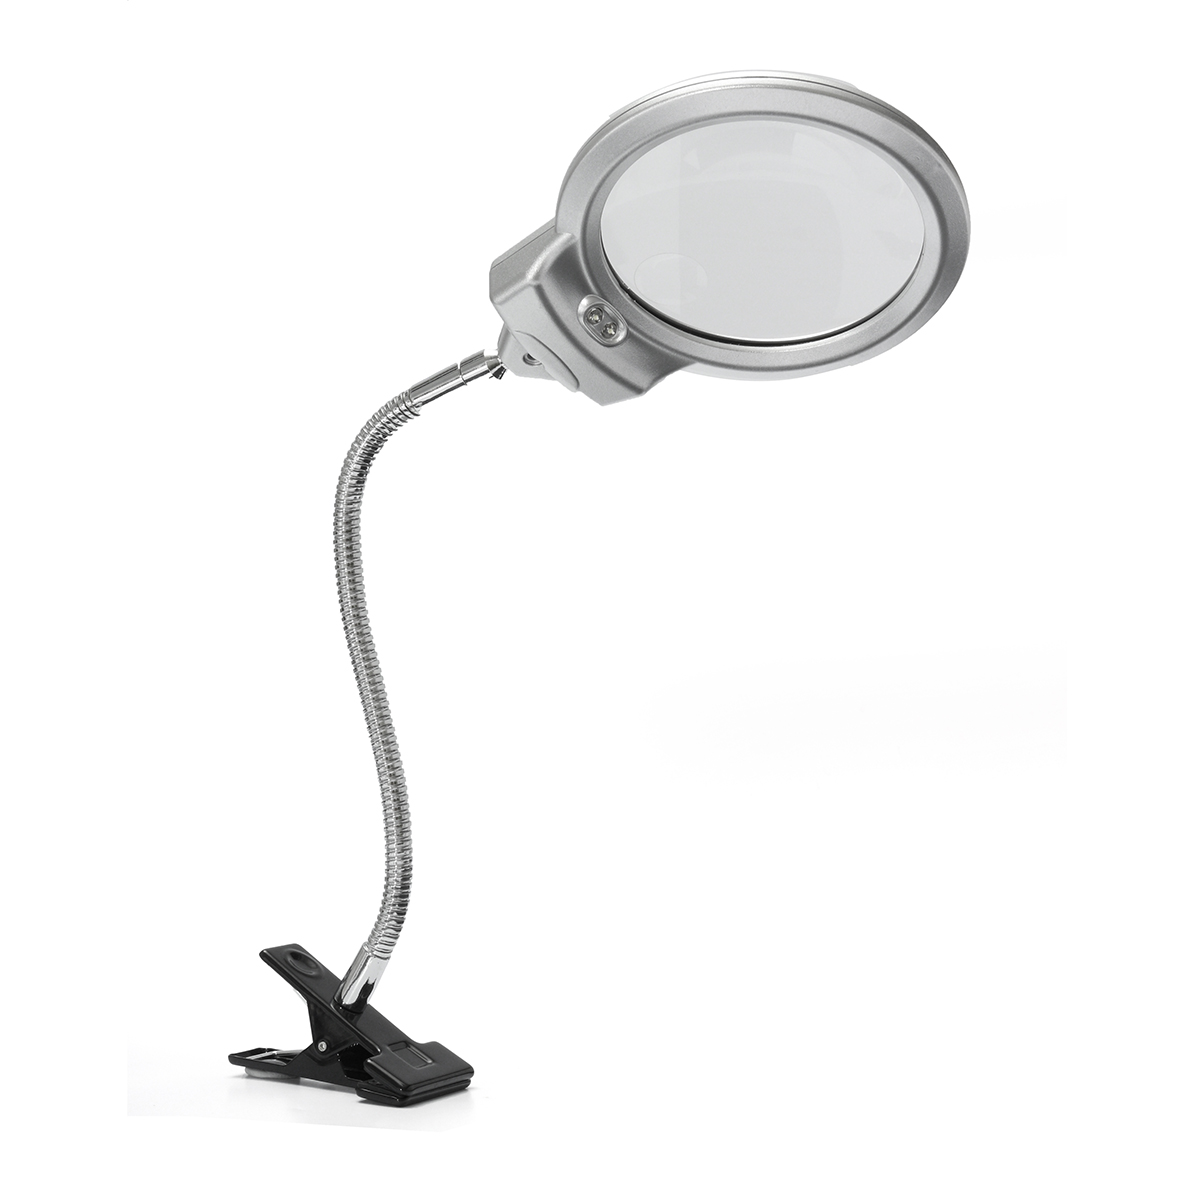 New-25-x-90MM-5-x-22MM-2-LED-Lighted-Table-Top-Desk-Magnifier-Magnifying-Glass-with-Clamp-1075605-9